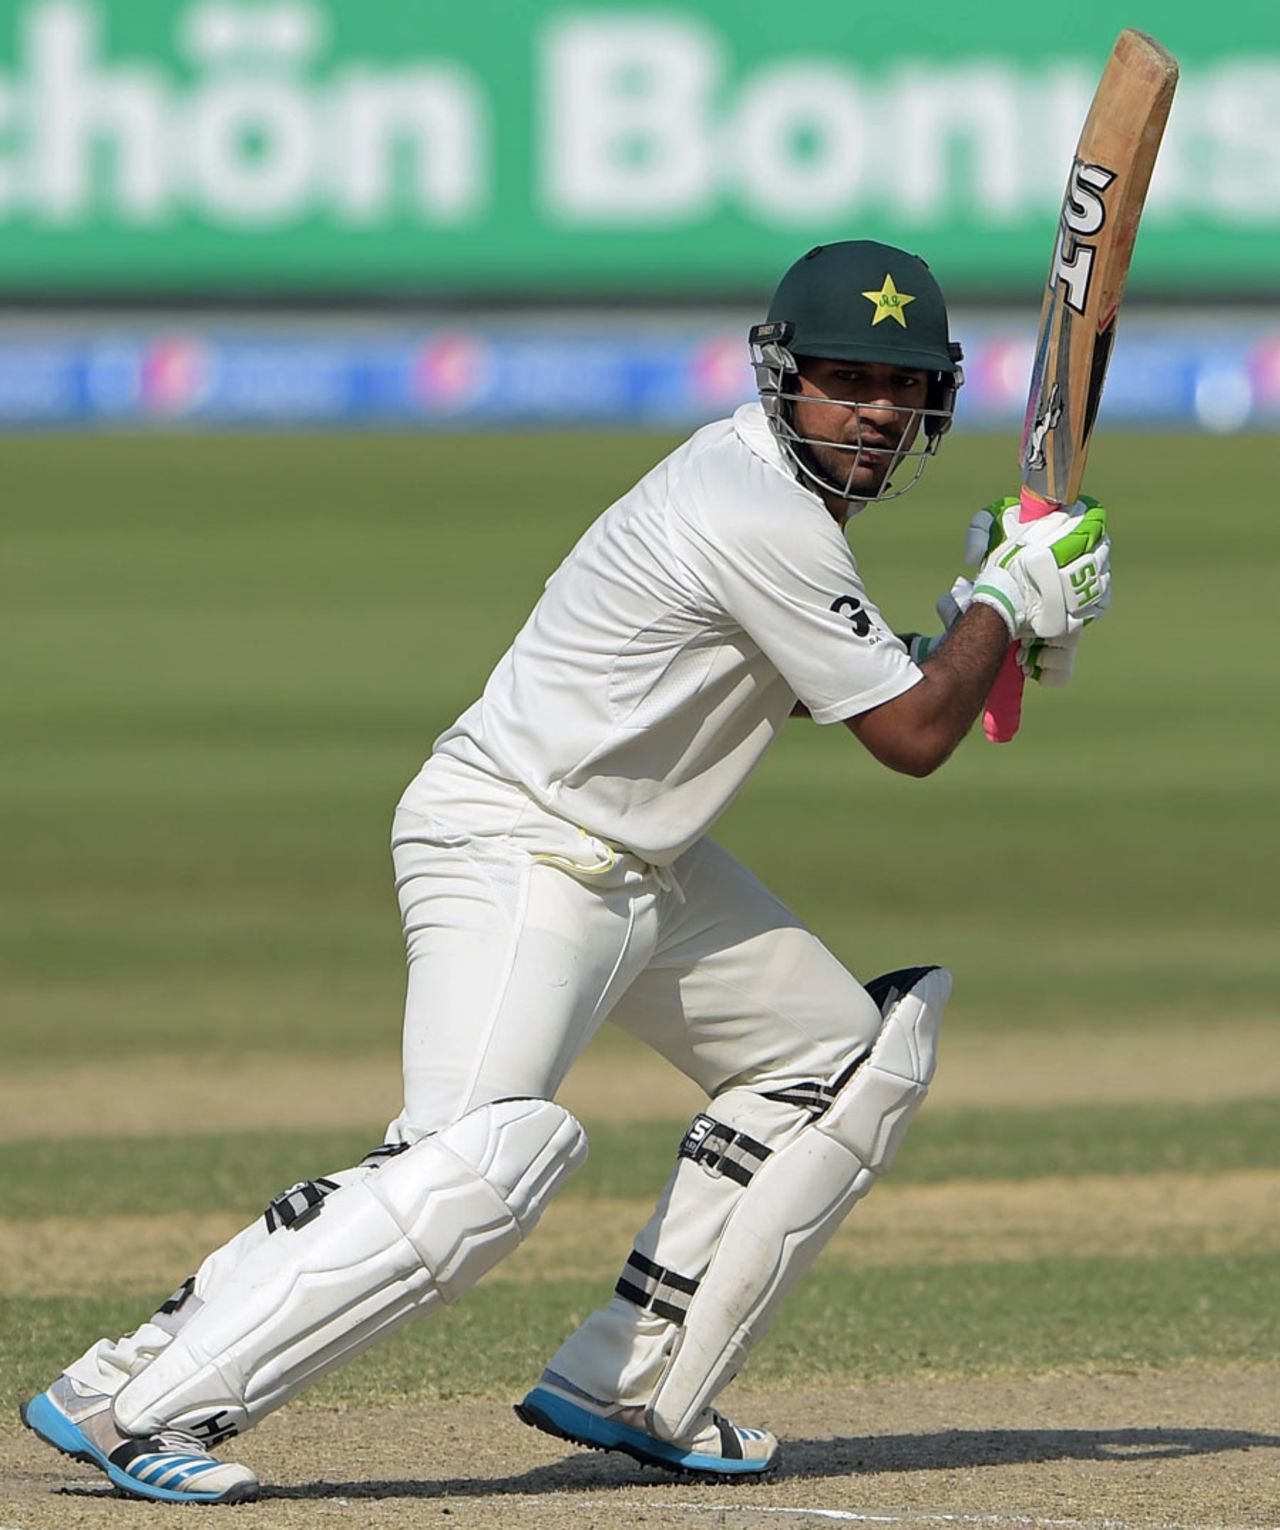 Sarfraz Ahmed looks on after playing to the off side, Pakistan v New Zealand, 2nd Test, Dubai, 4th day, November 20, 2014